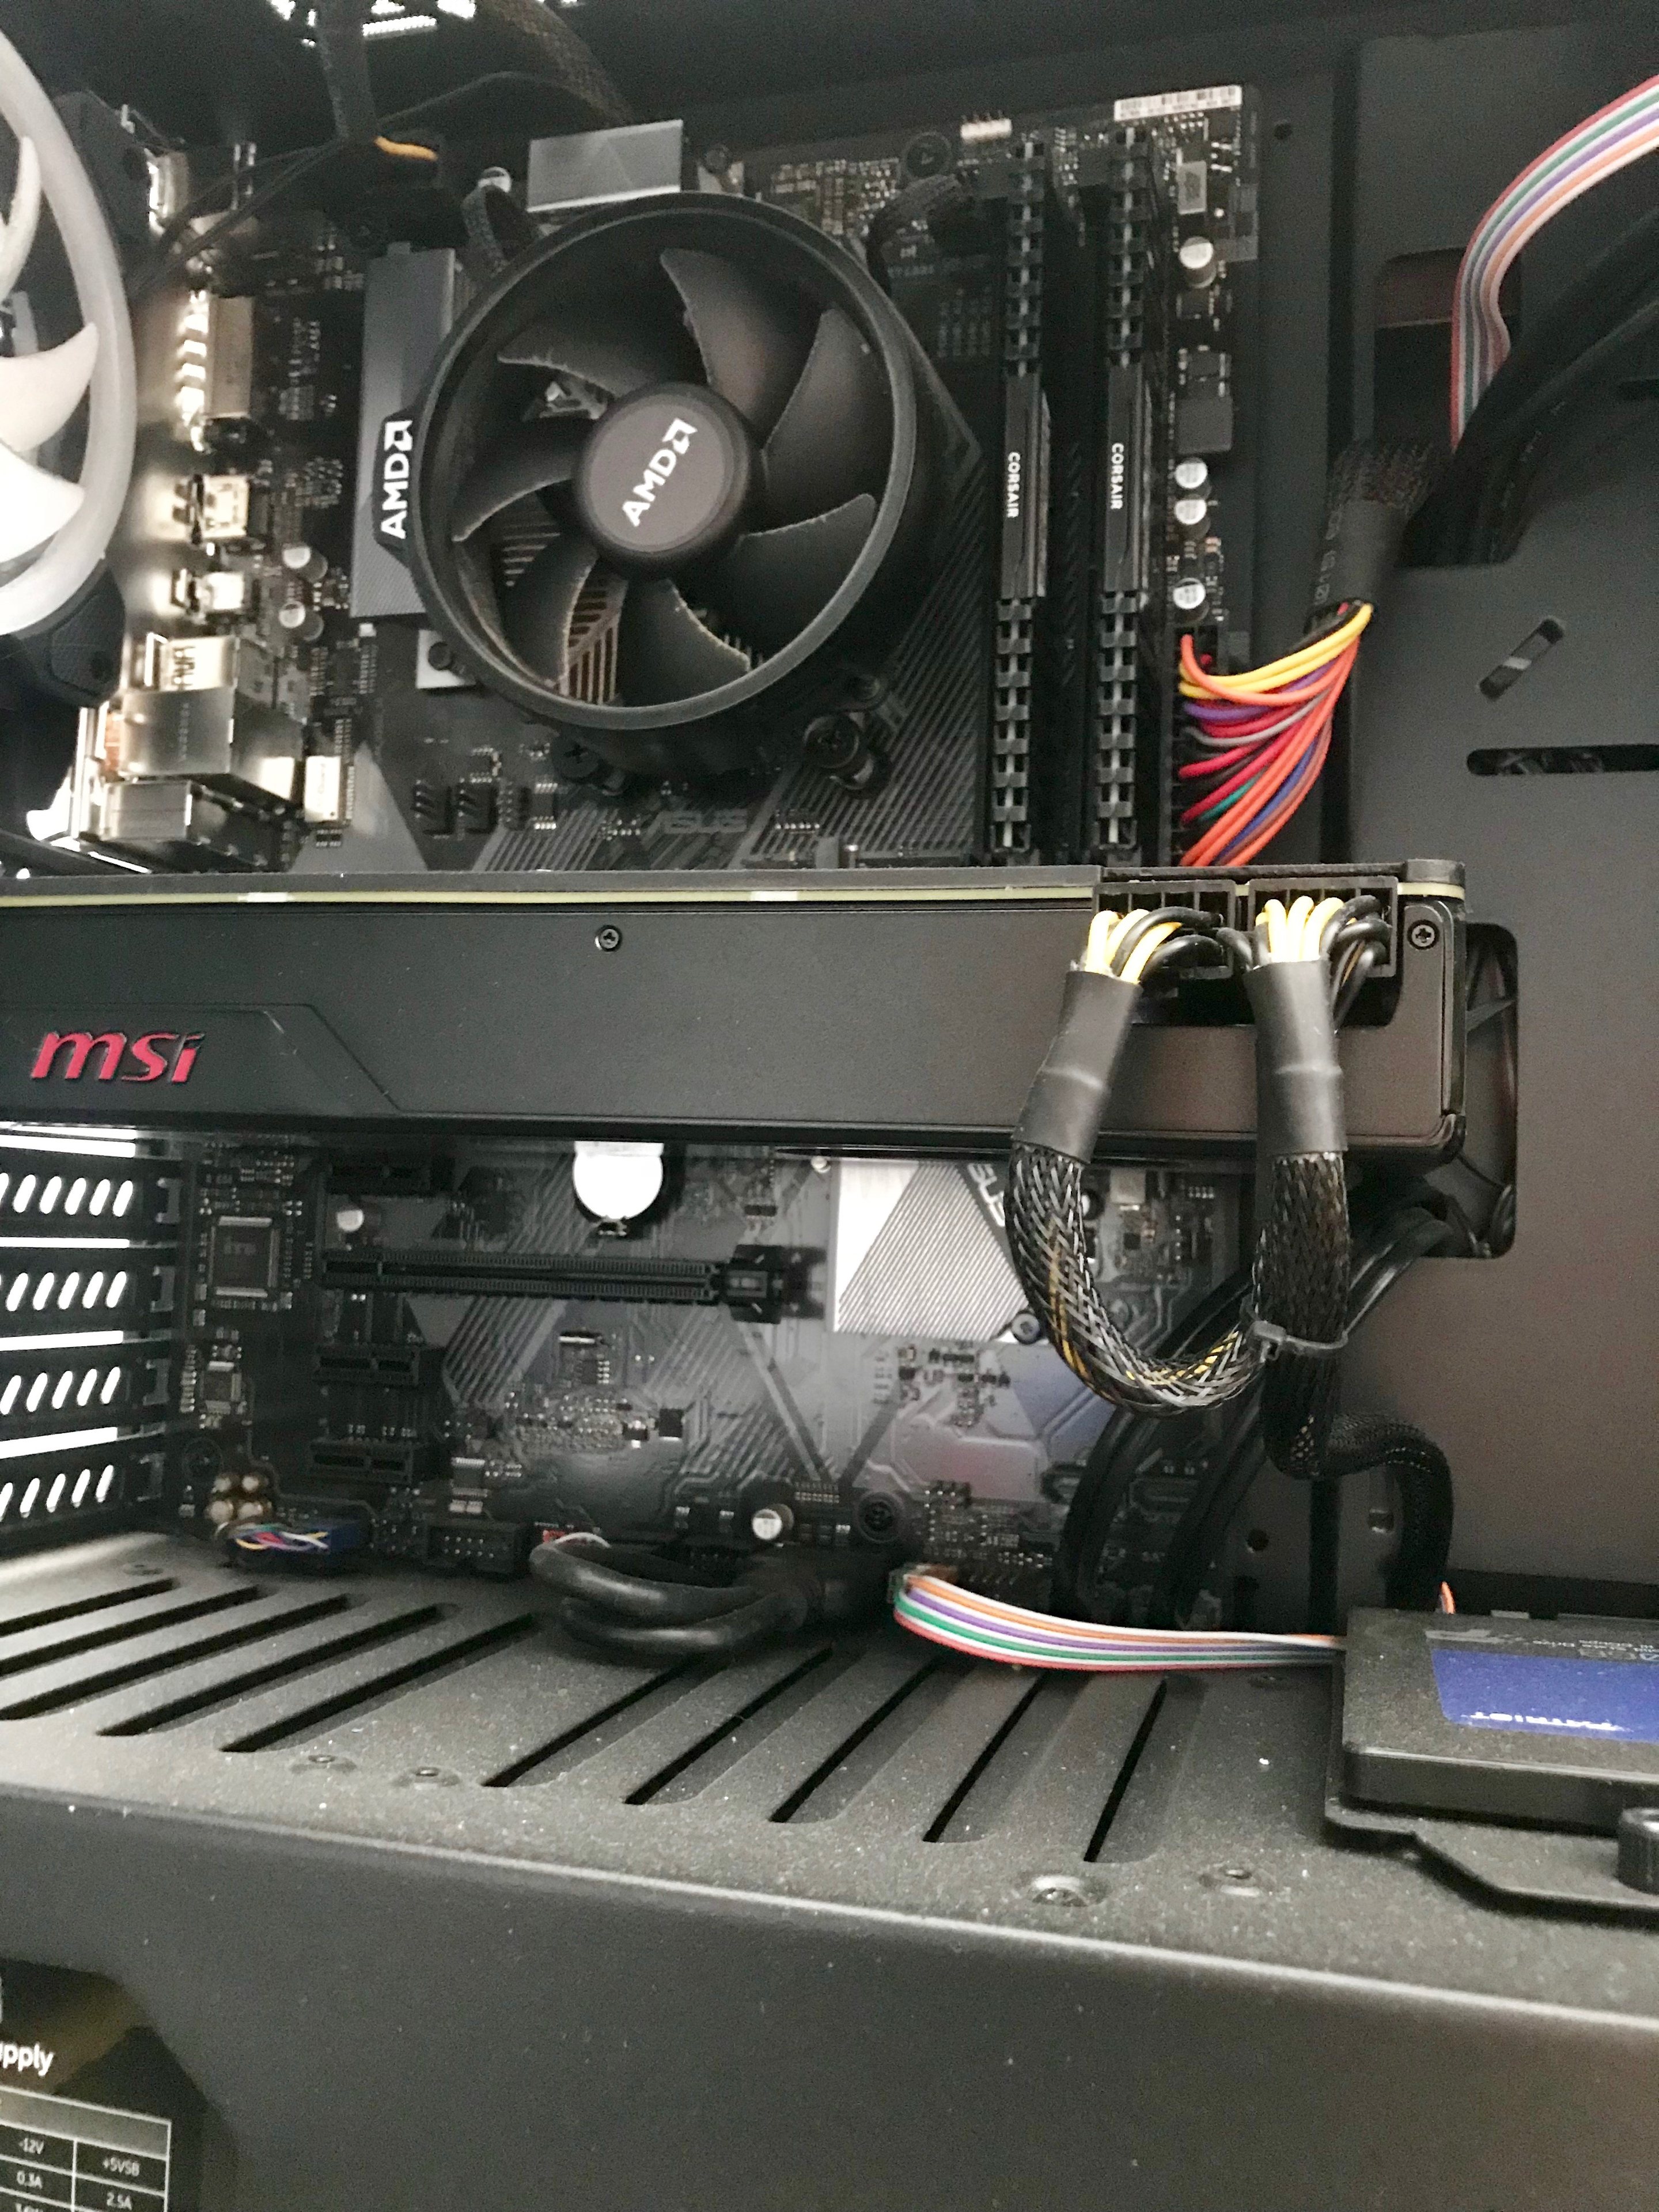 Is there a hard drive missing in this PC? - Page 1 - Computers, Gadgets & Stuff - PistonHeads